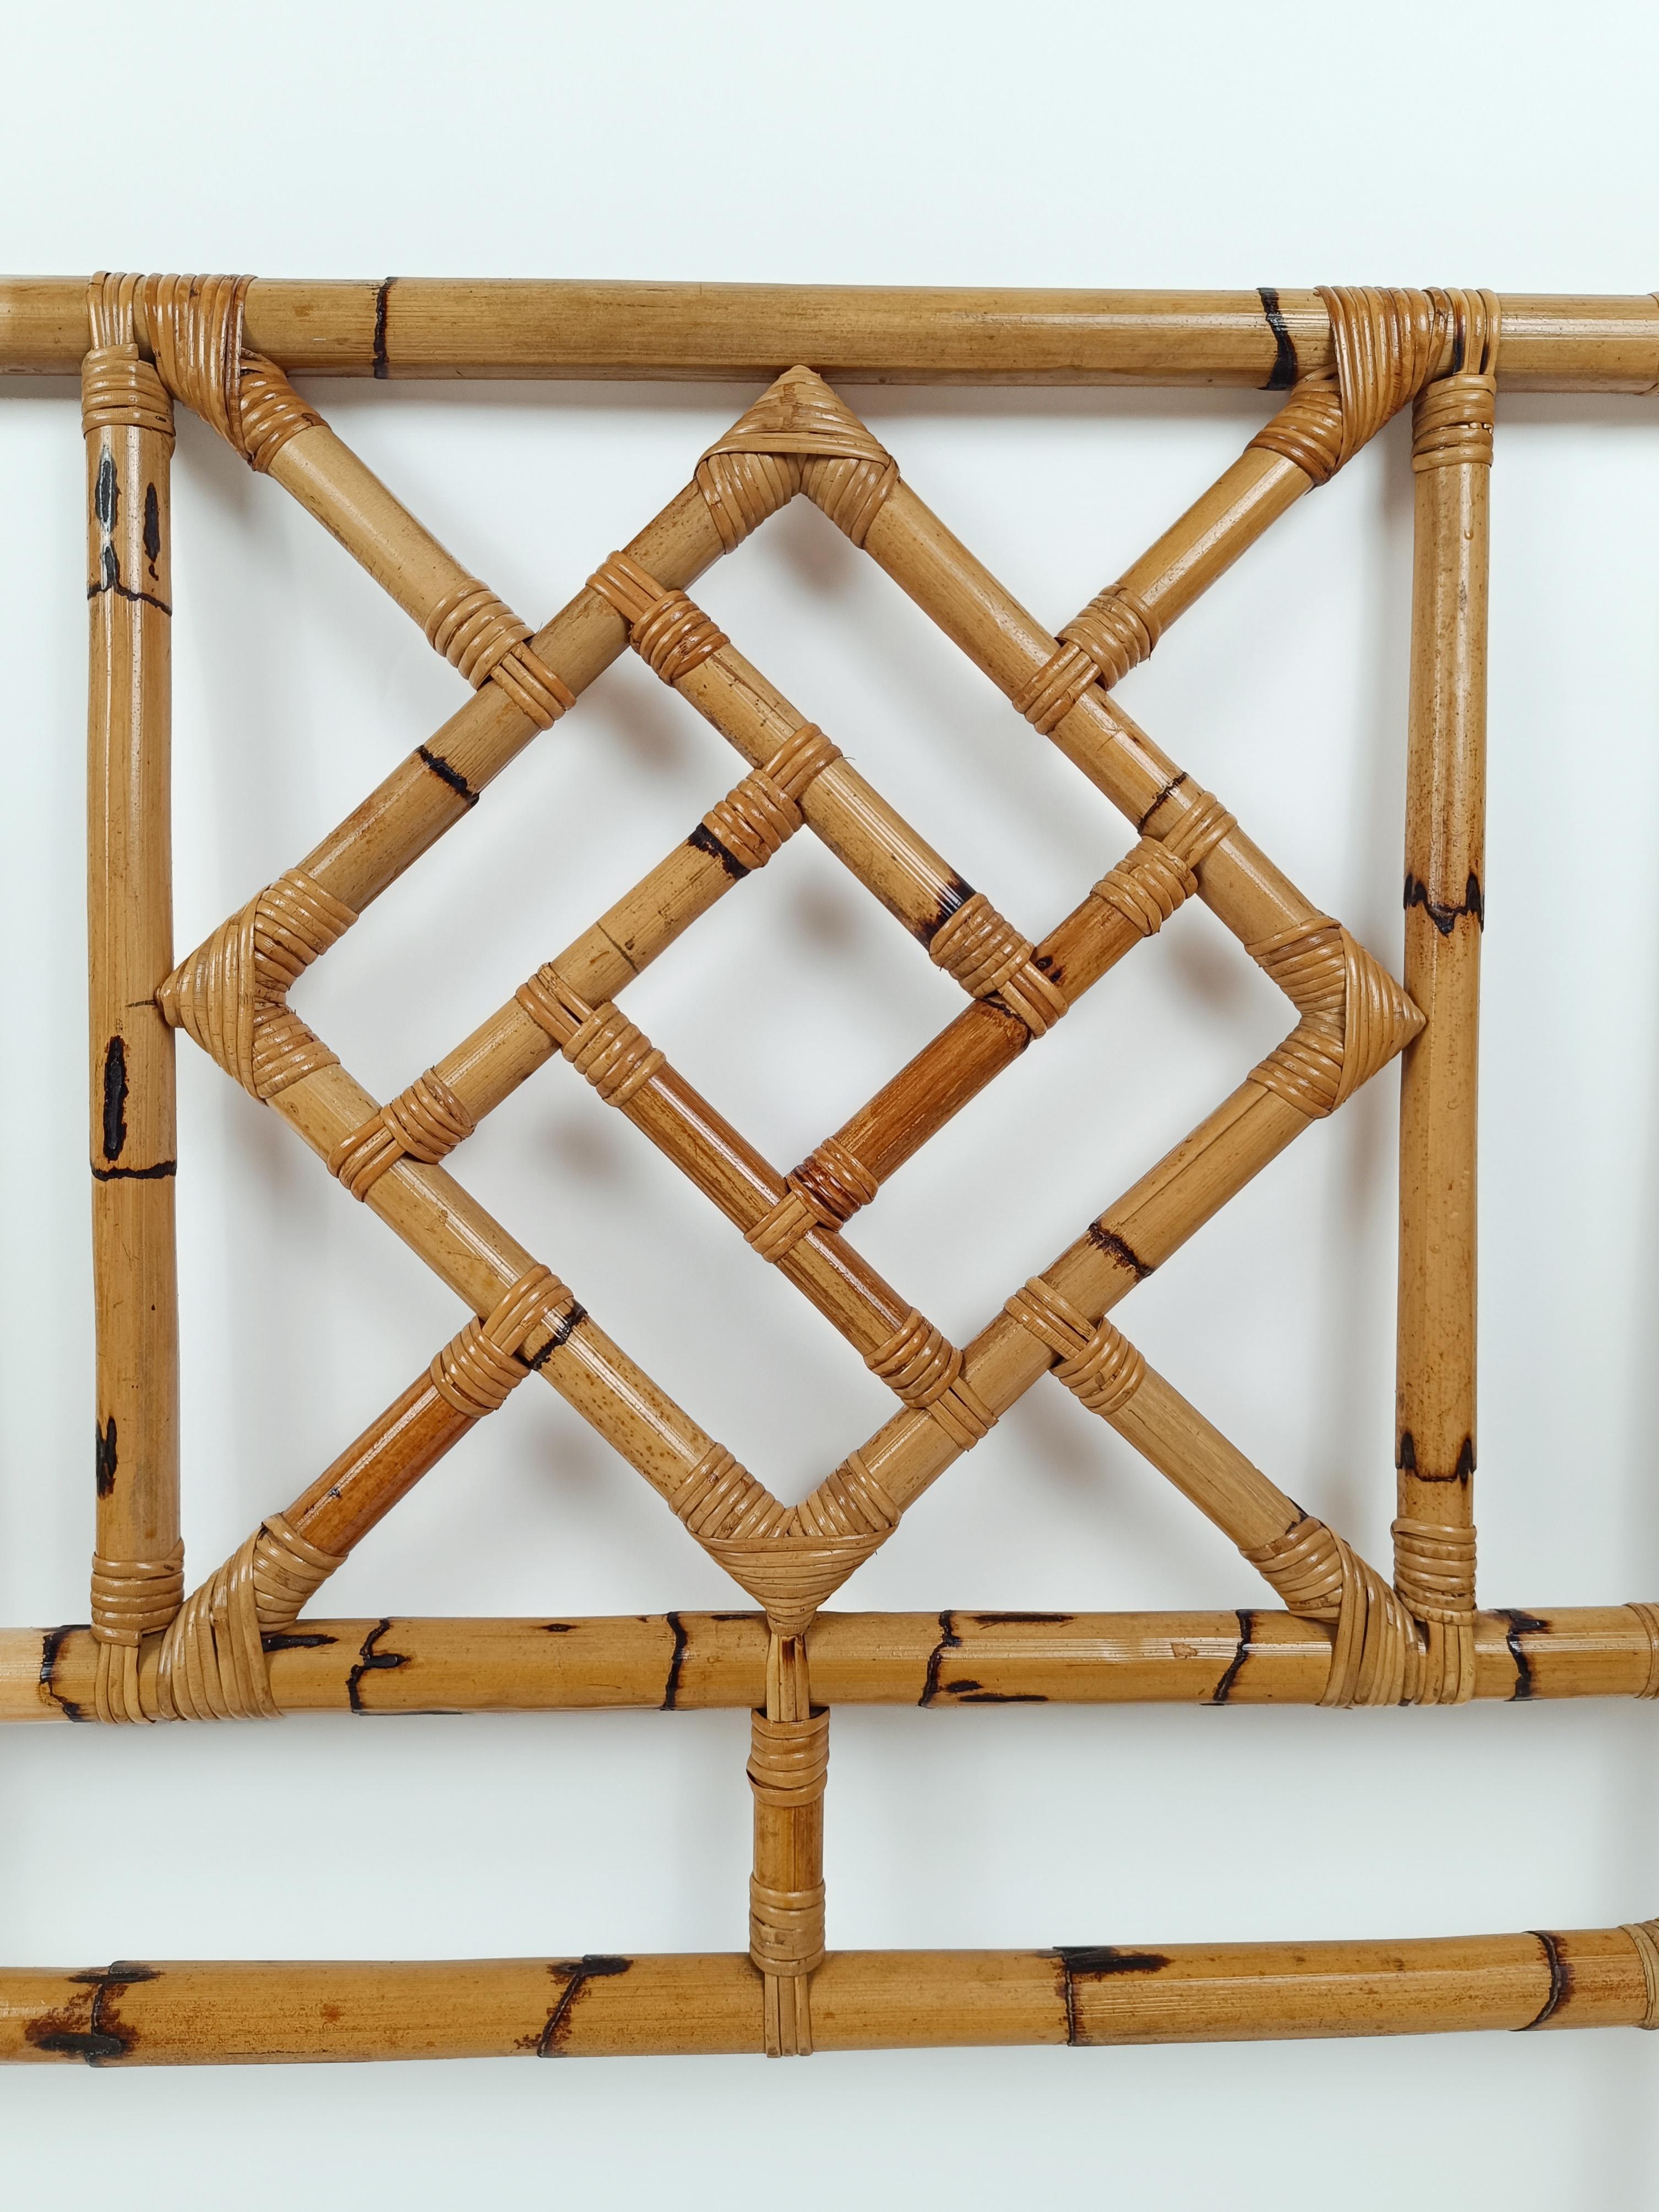  MId 20th Century Bamboo and Rattan Bed Headboard in Chinese Chippendale style  In Good Condition For Sale In Roma, IT